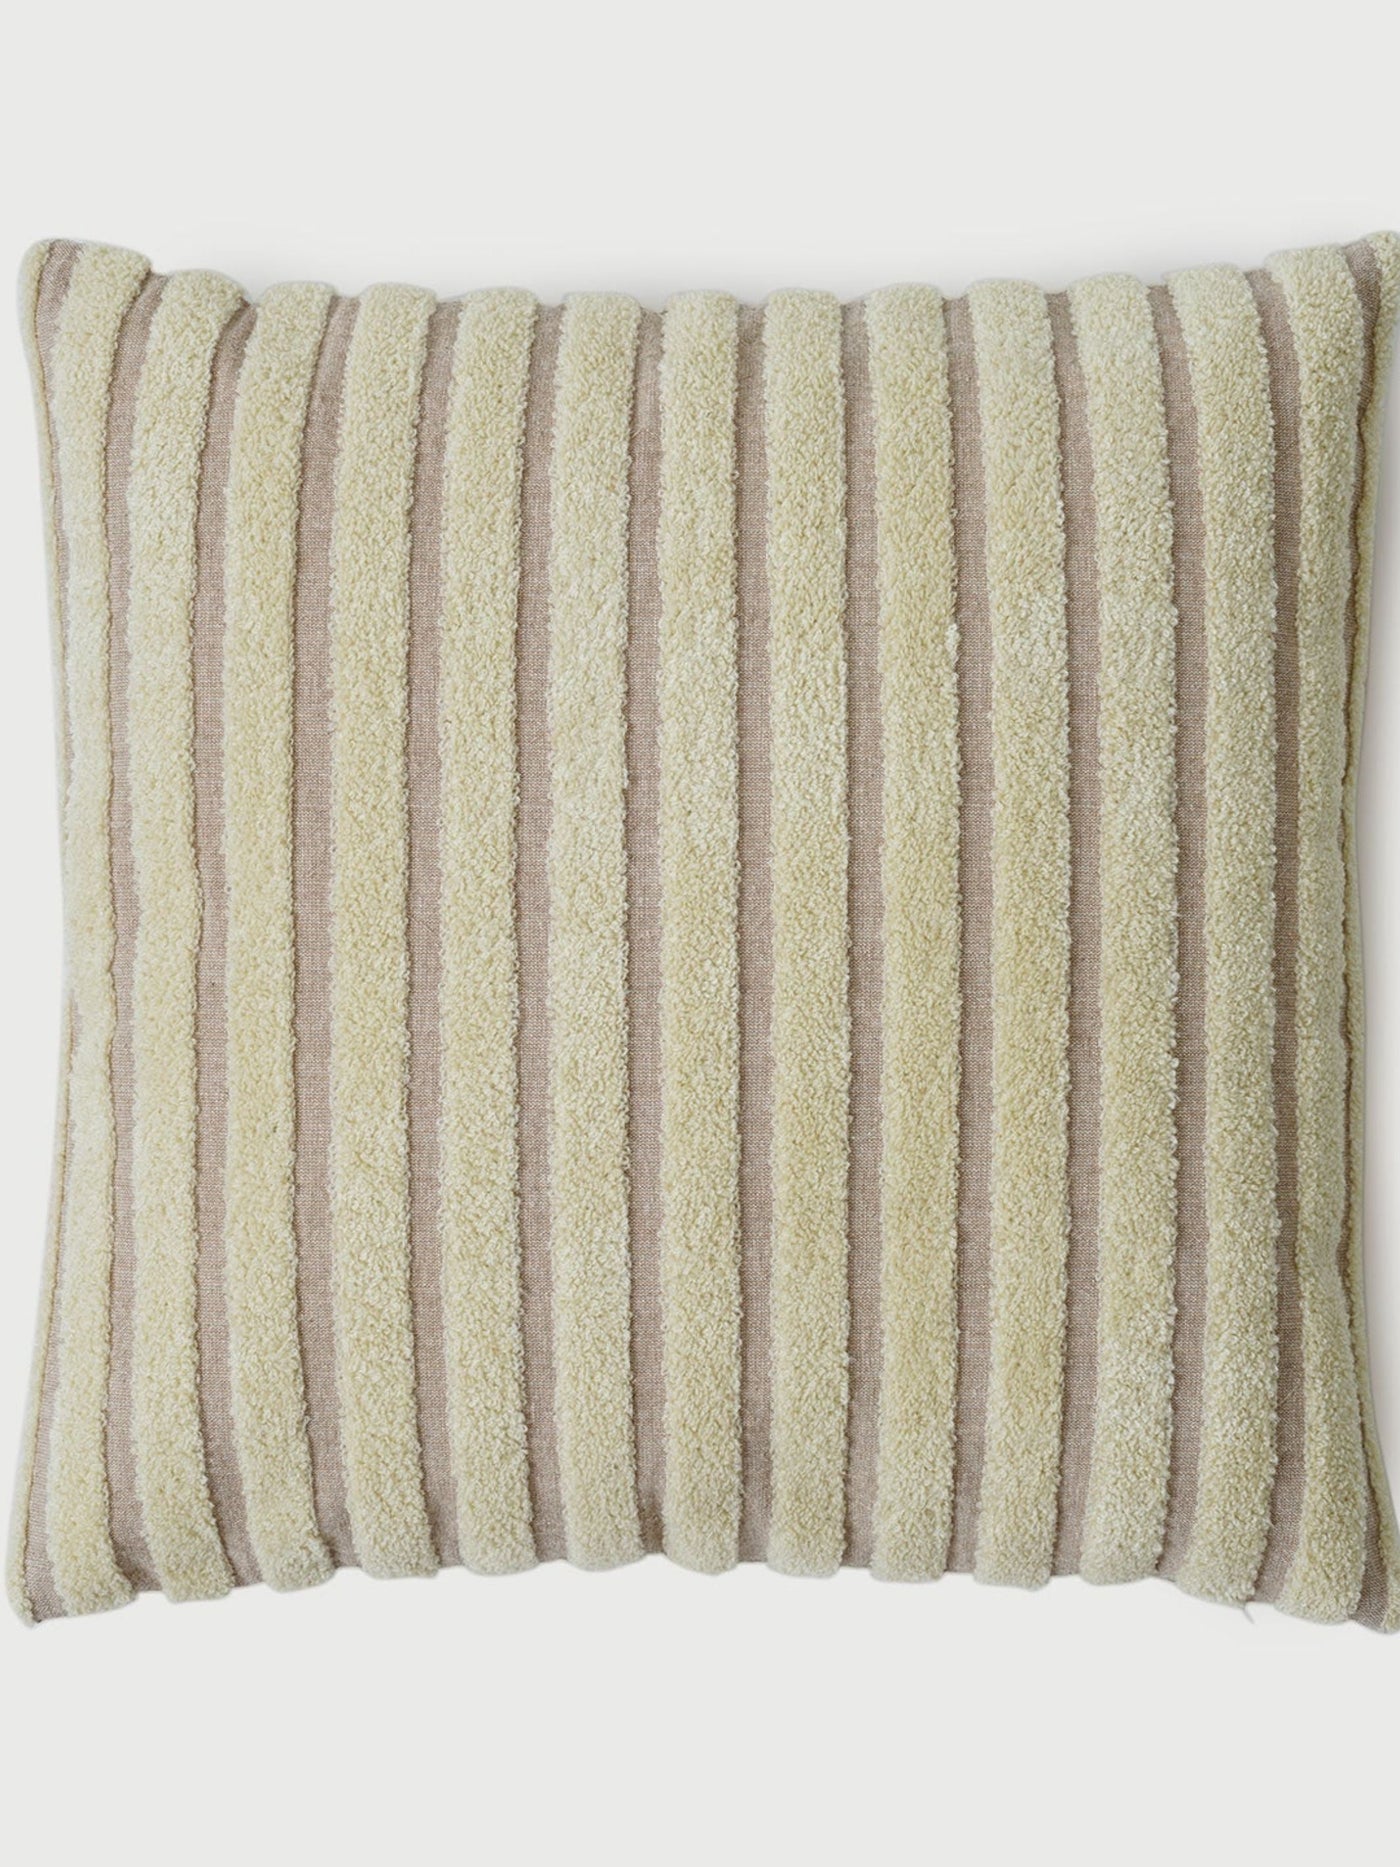 Cushion Cover - Striped Ivory